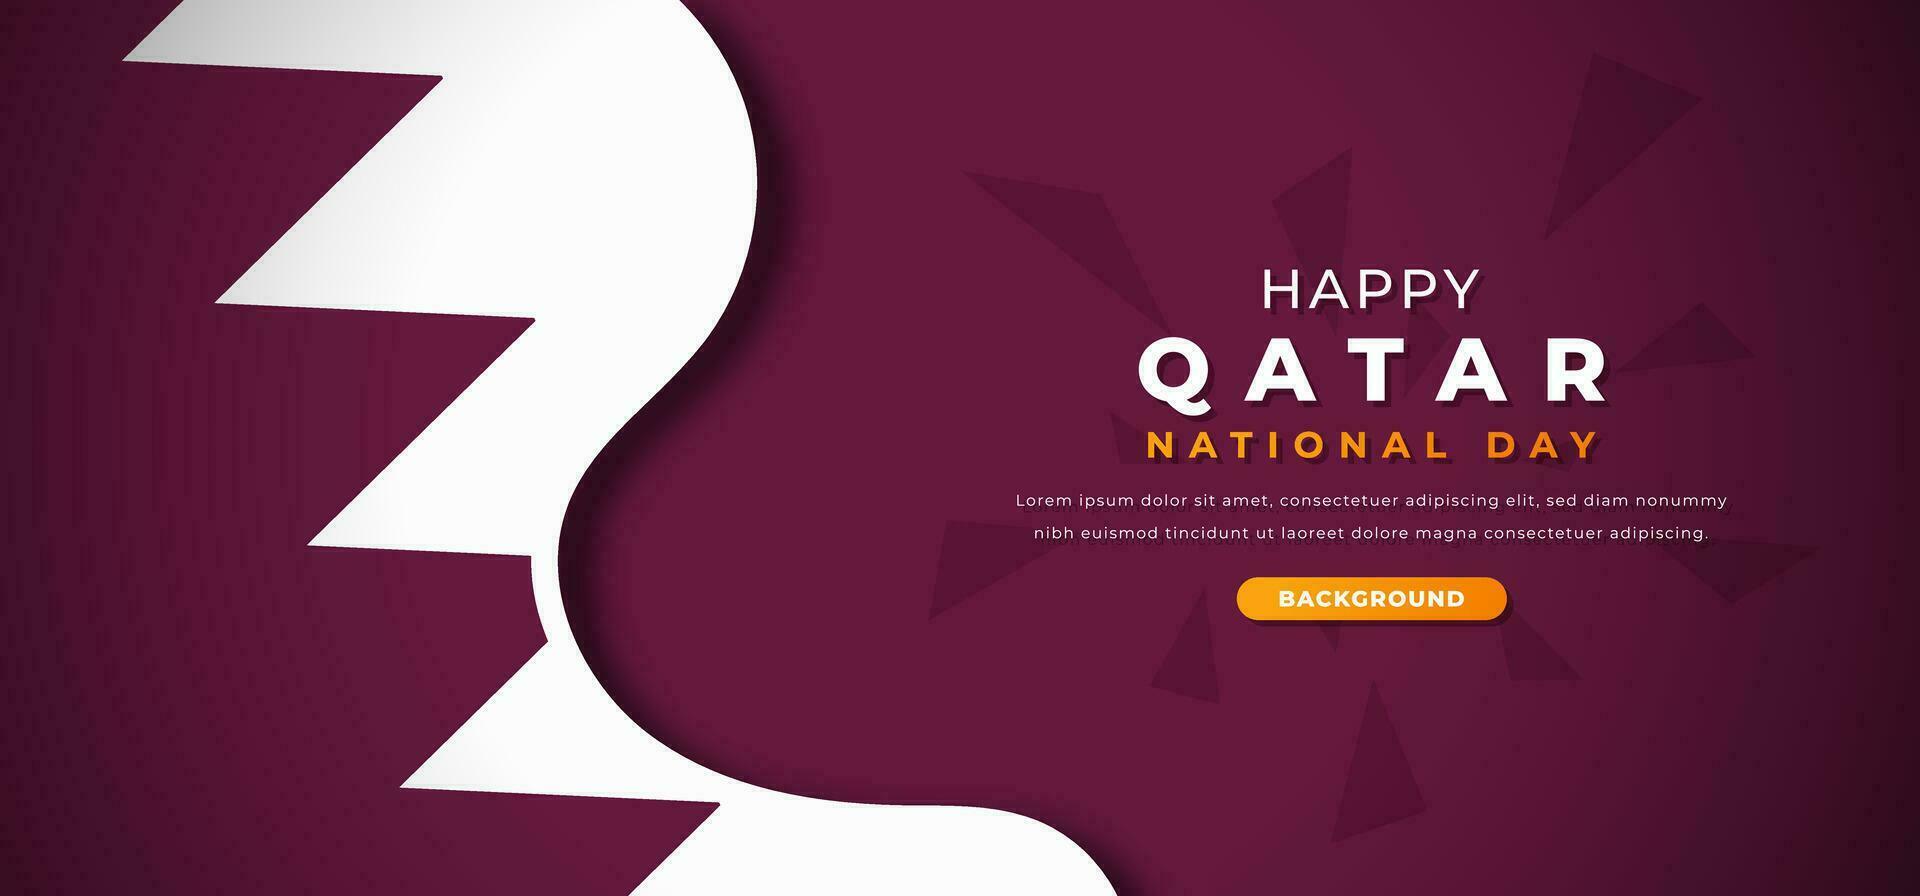 Happy Qatar National Day Design Paper Cut Shapes Background Illustration for Poster, Banner, Advertising, Greeting Card vector